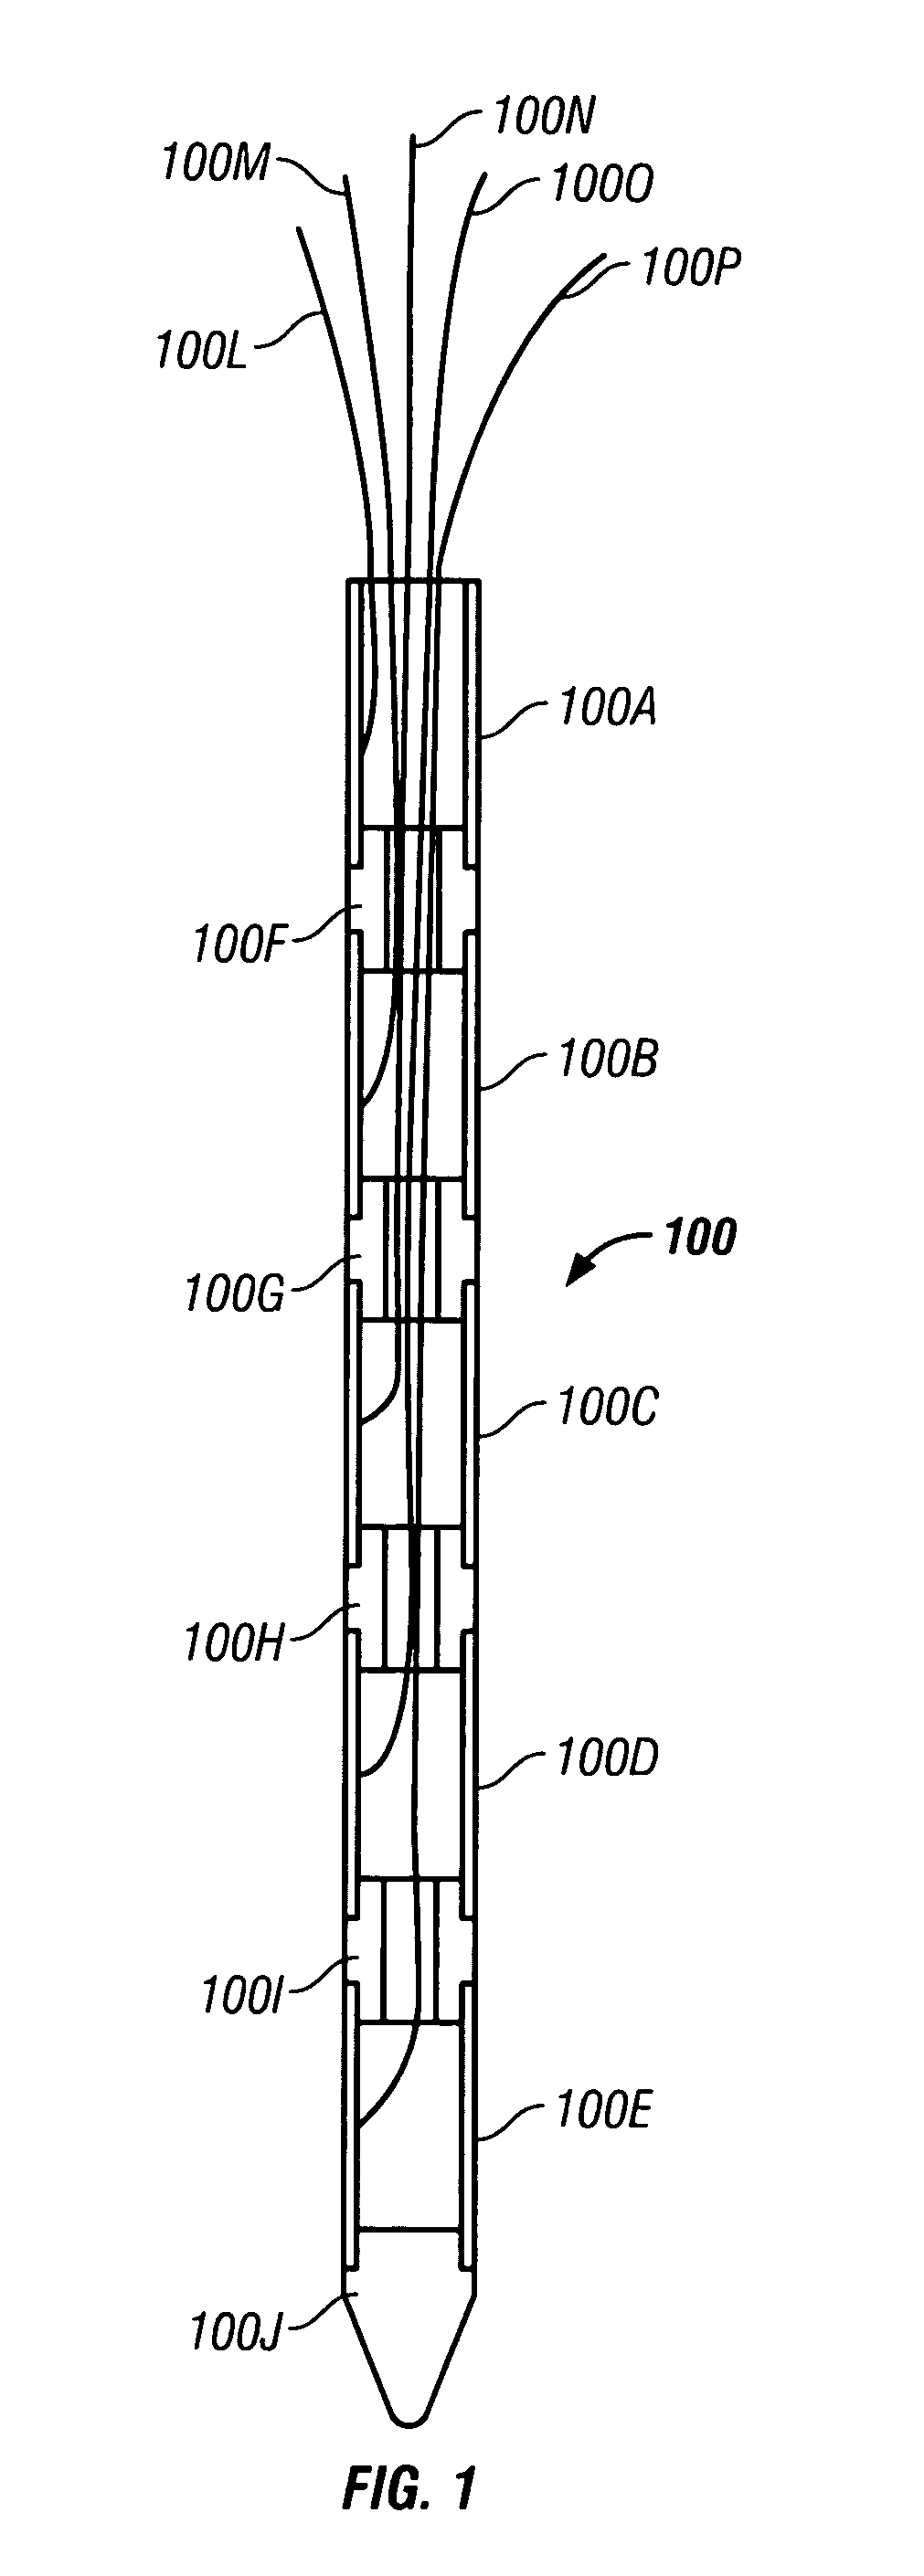 Device and method for tissue ablation using bipolar radio-frequency current